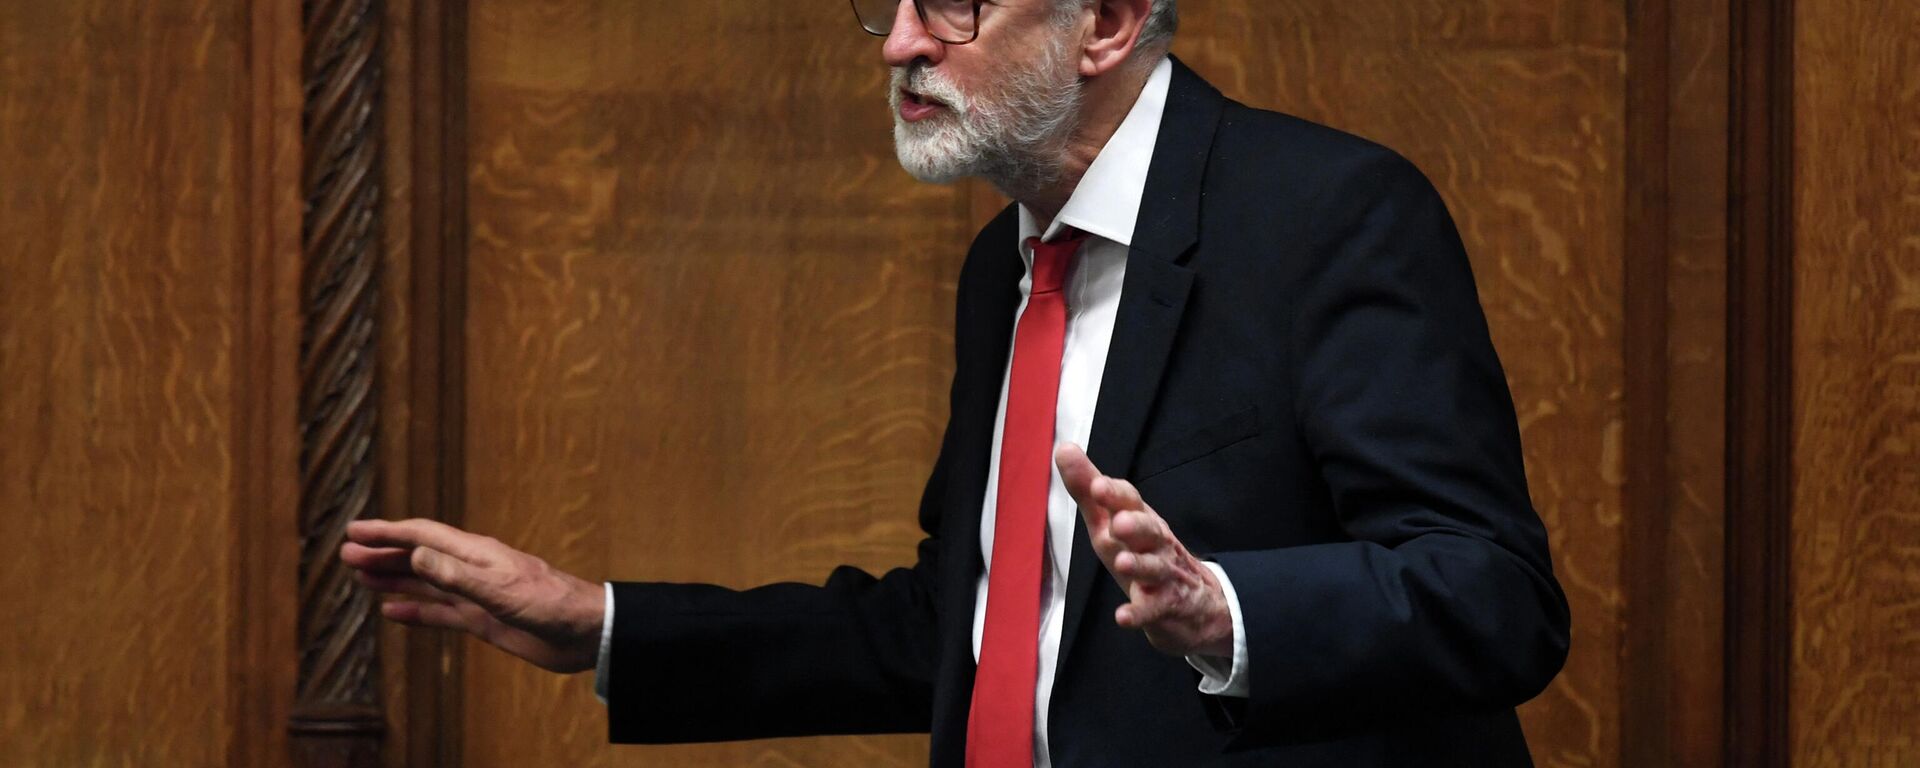 A handout photograph released by the UK Parliament shows opposition Labour Party former leader Jeremy Corbyn speaking during a debate on cladding removal costs in the House of Commons in London on January 10, 2022 - Sputnik International, 1920, 21.04.2022